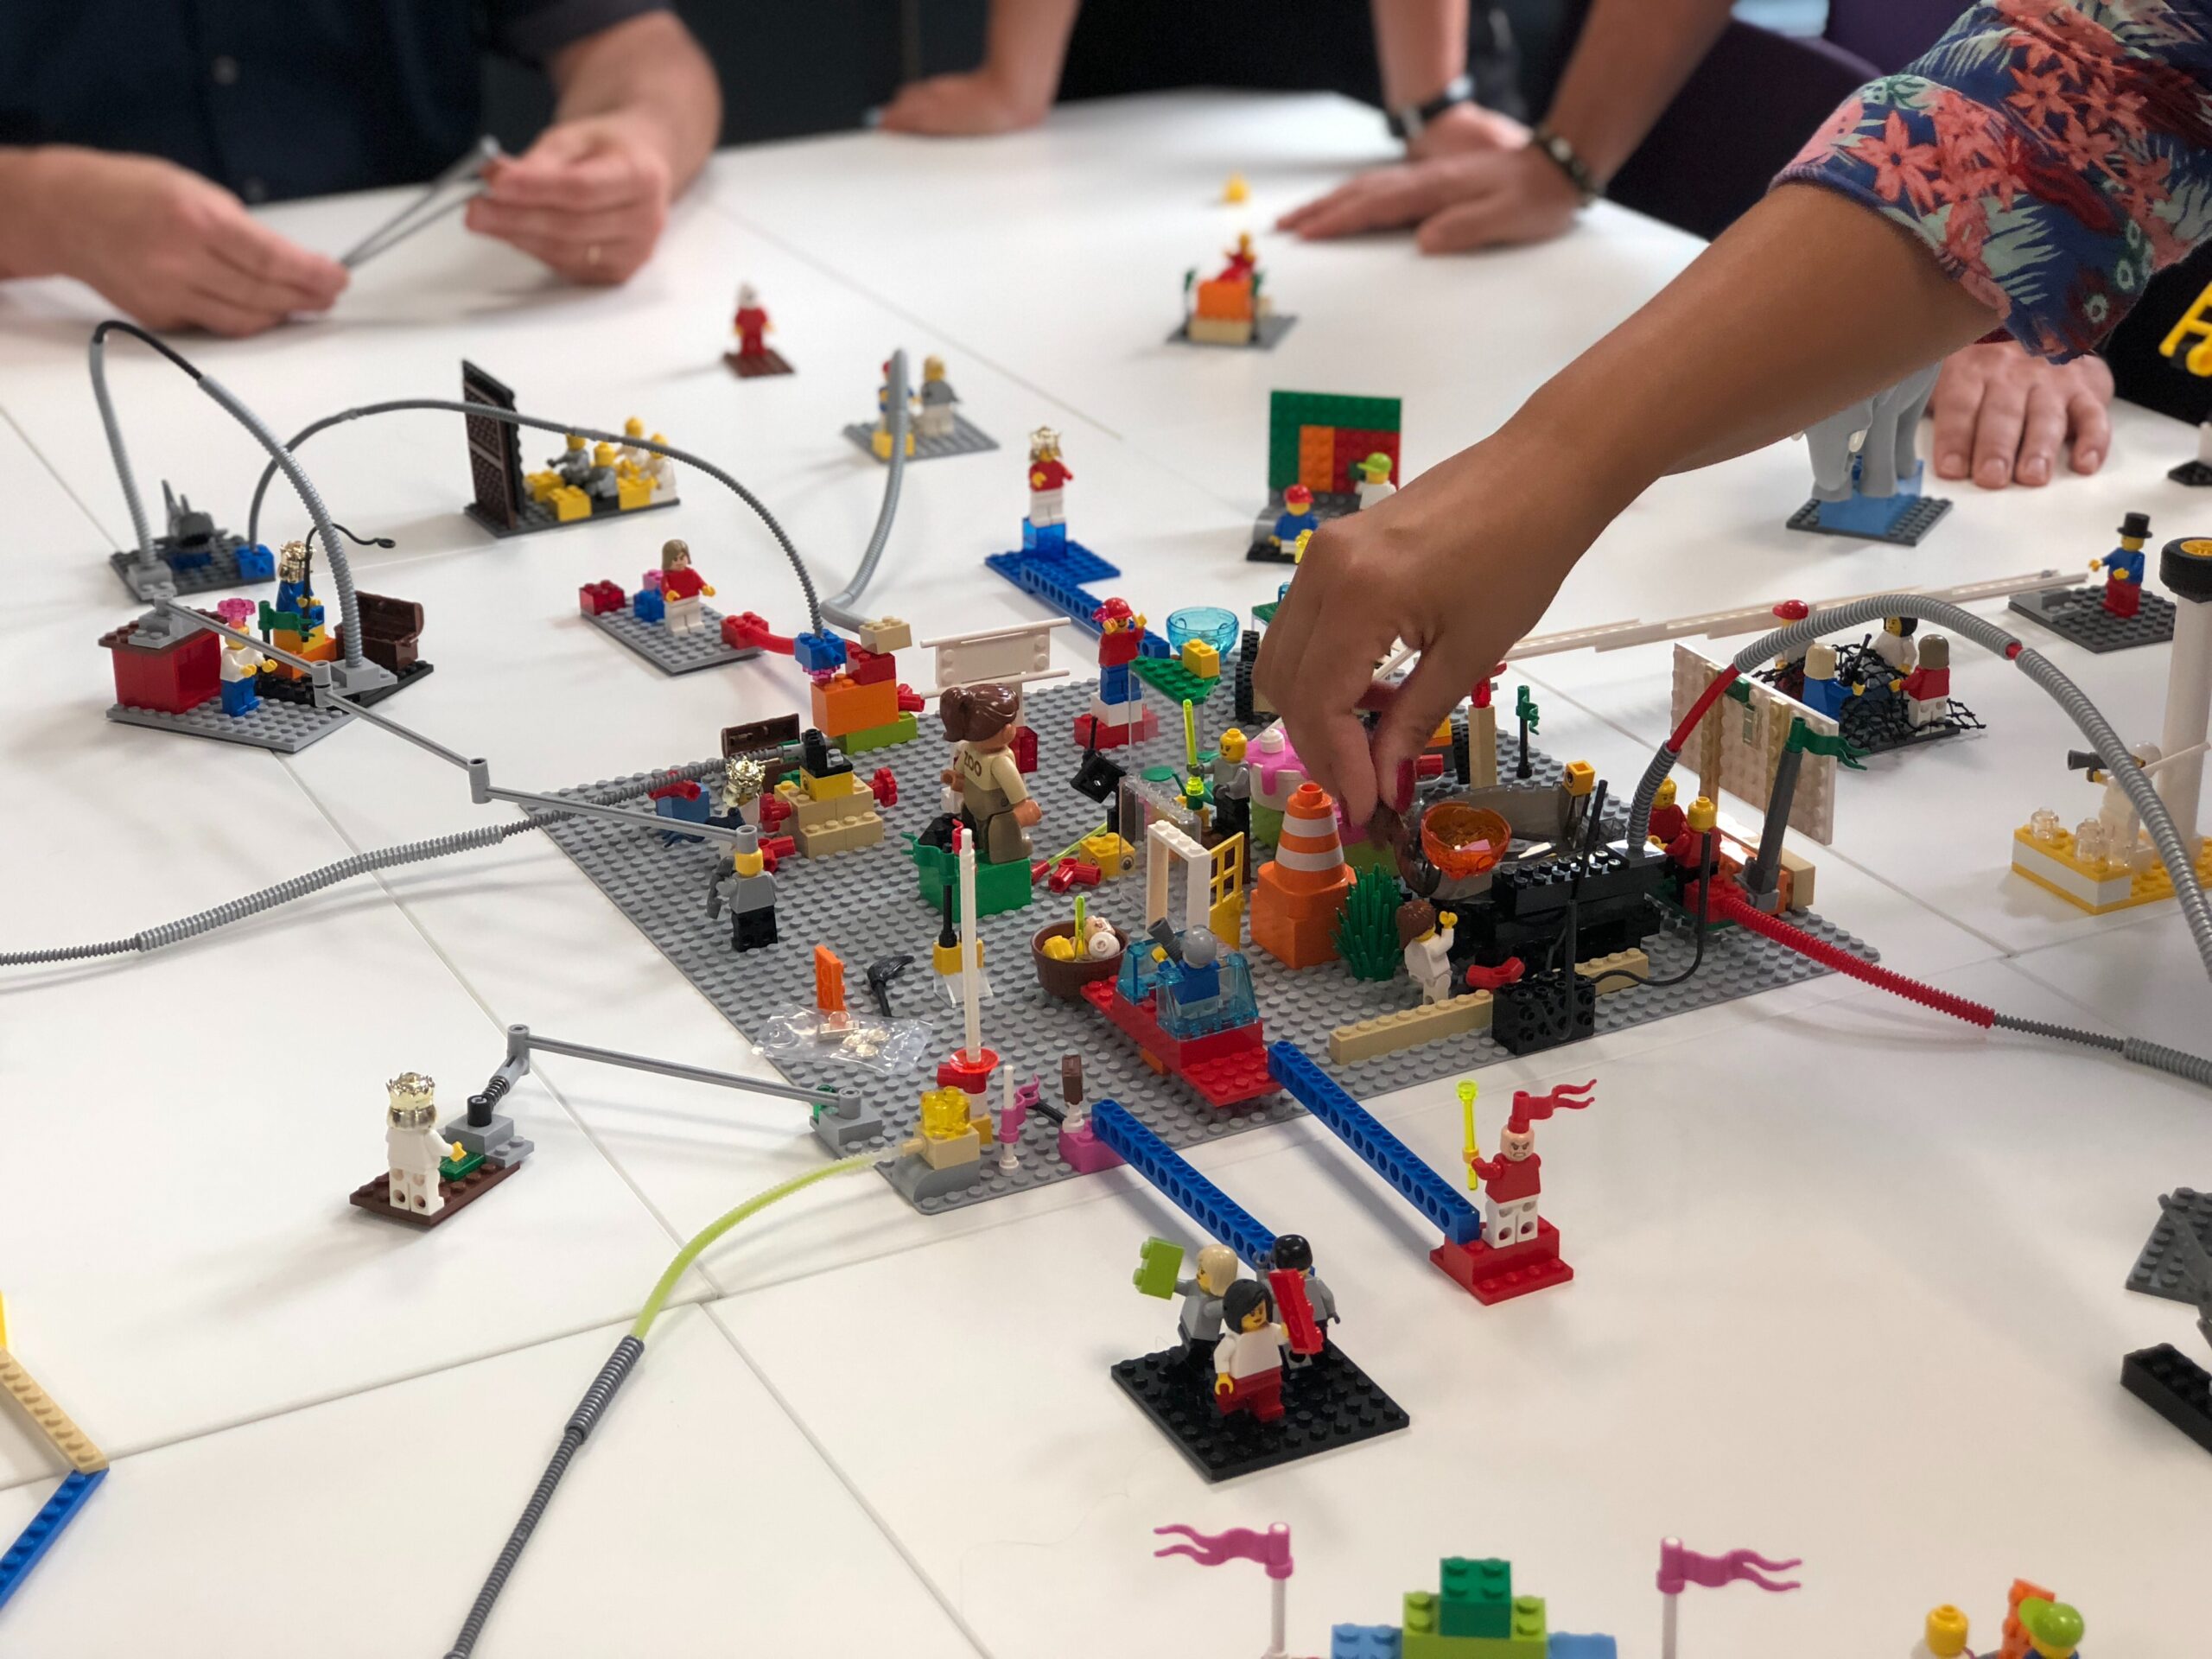 People around a table work on a Lego model